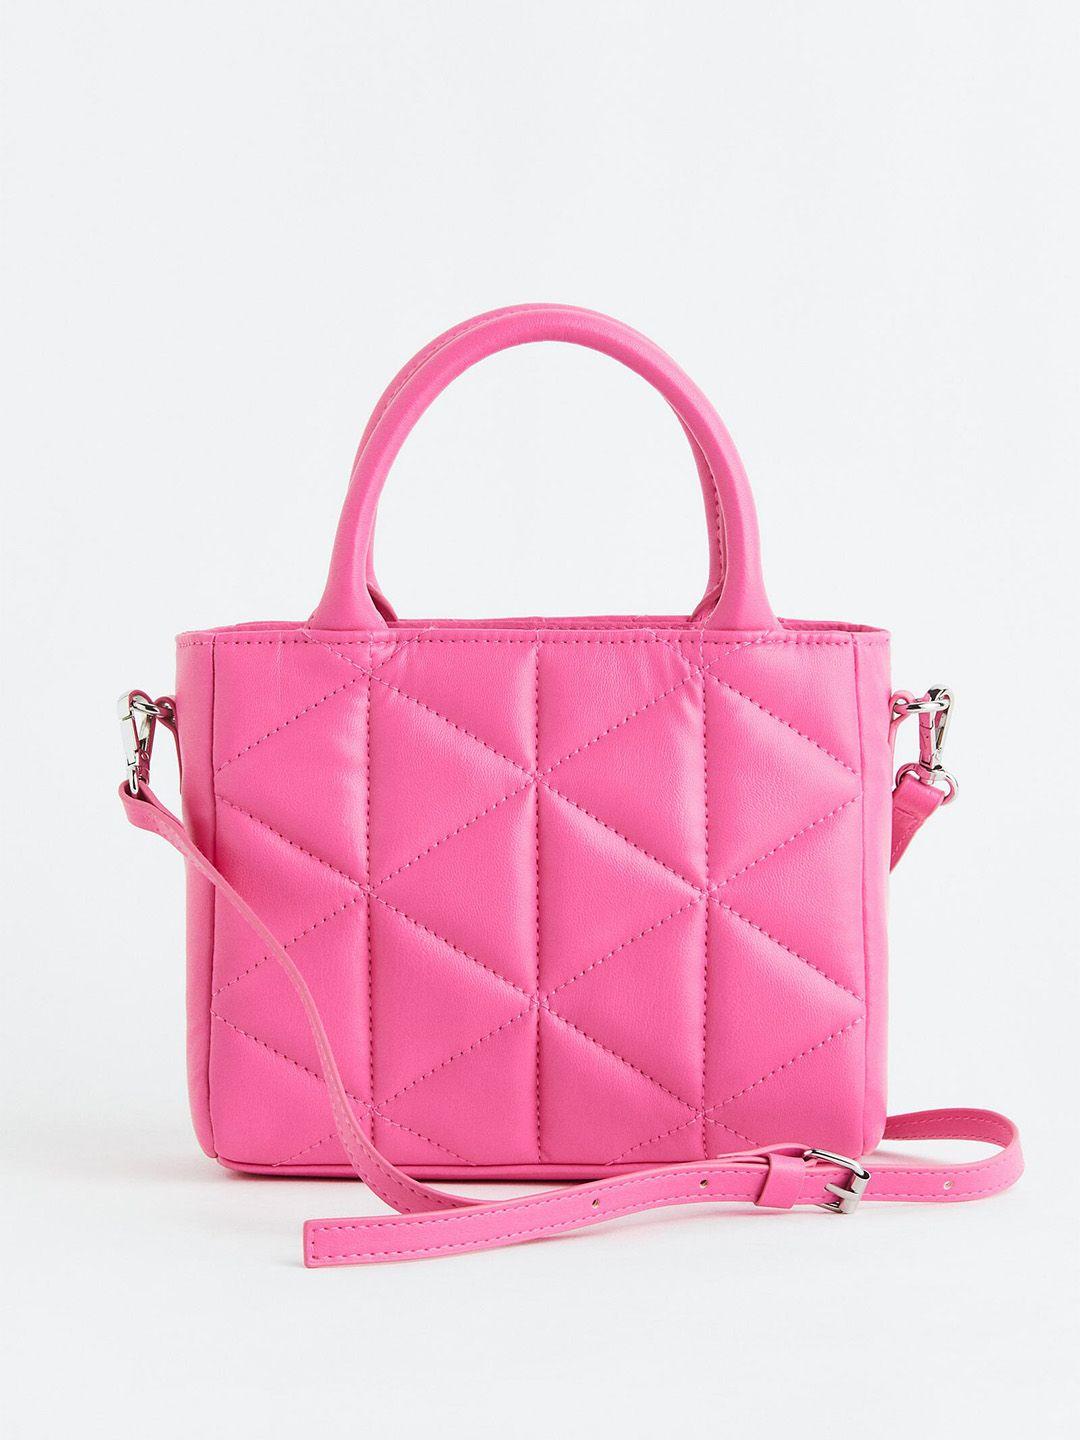 h&m quilted handbag